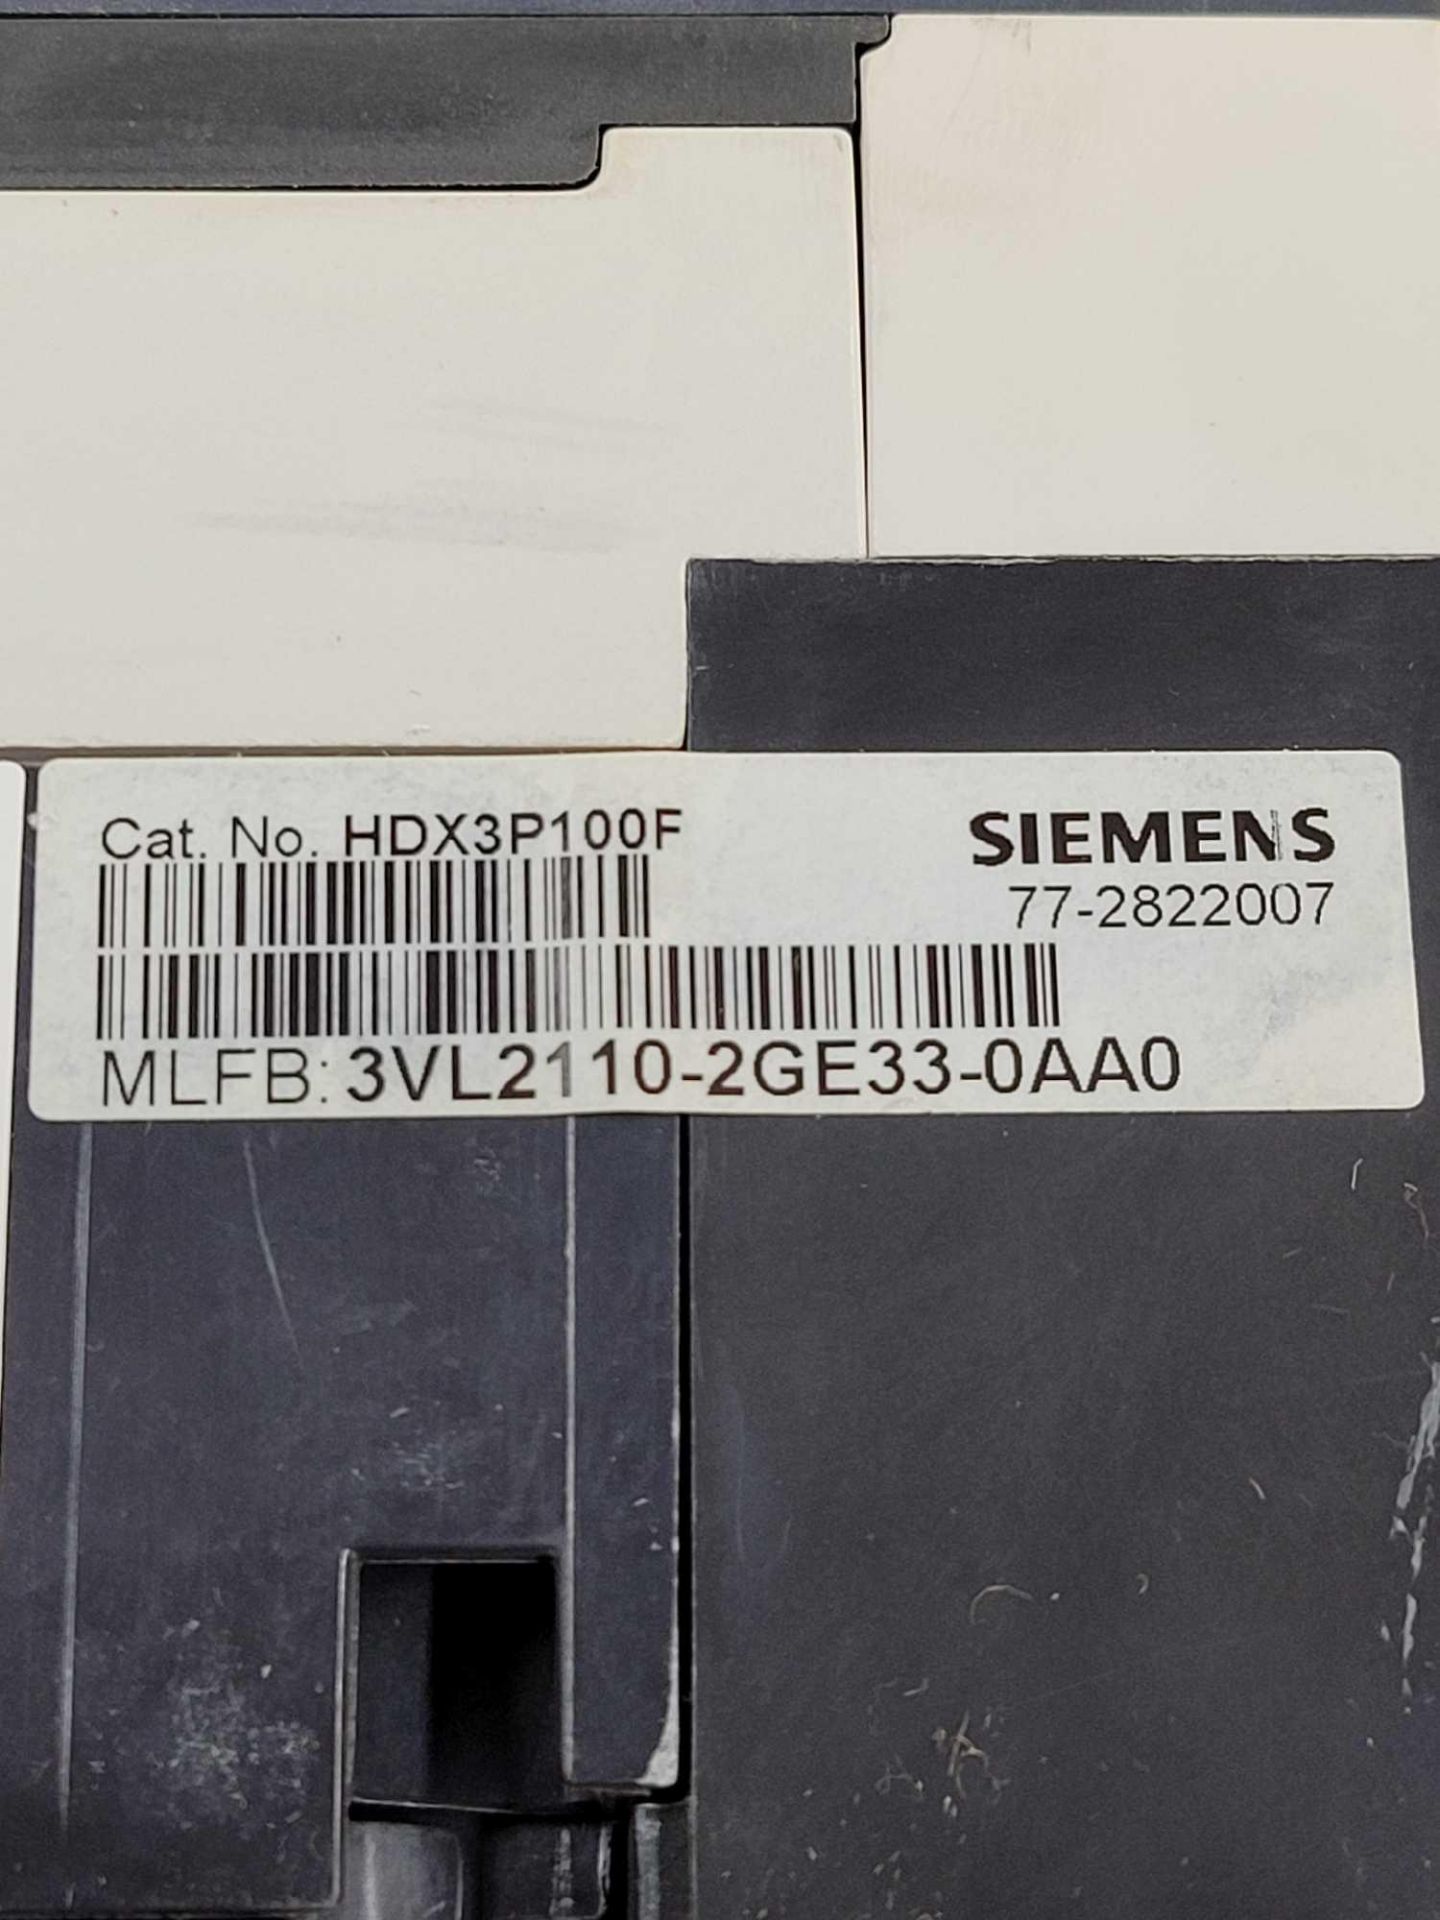 LOT OF 2 SIEMENS / (1) SIEMENS HFX3P250 with 3VL9300-3HF01 and 8UC9400 ; 250 Amp Circuit Breaker wit - Image 19 of 22